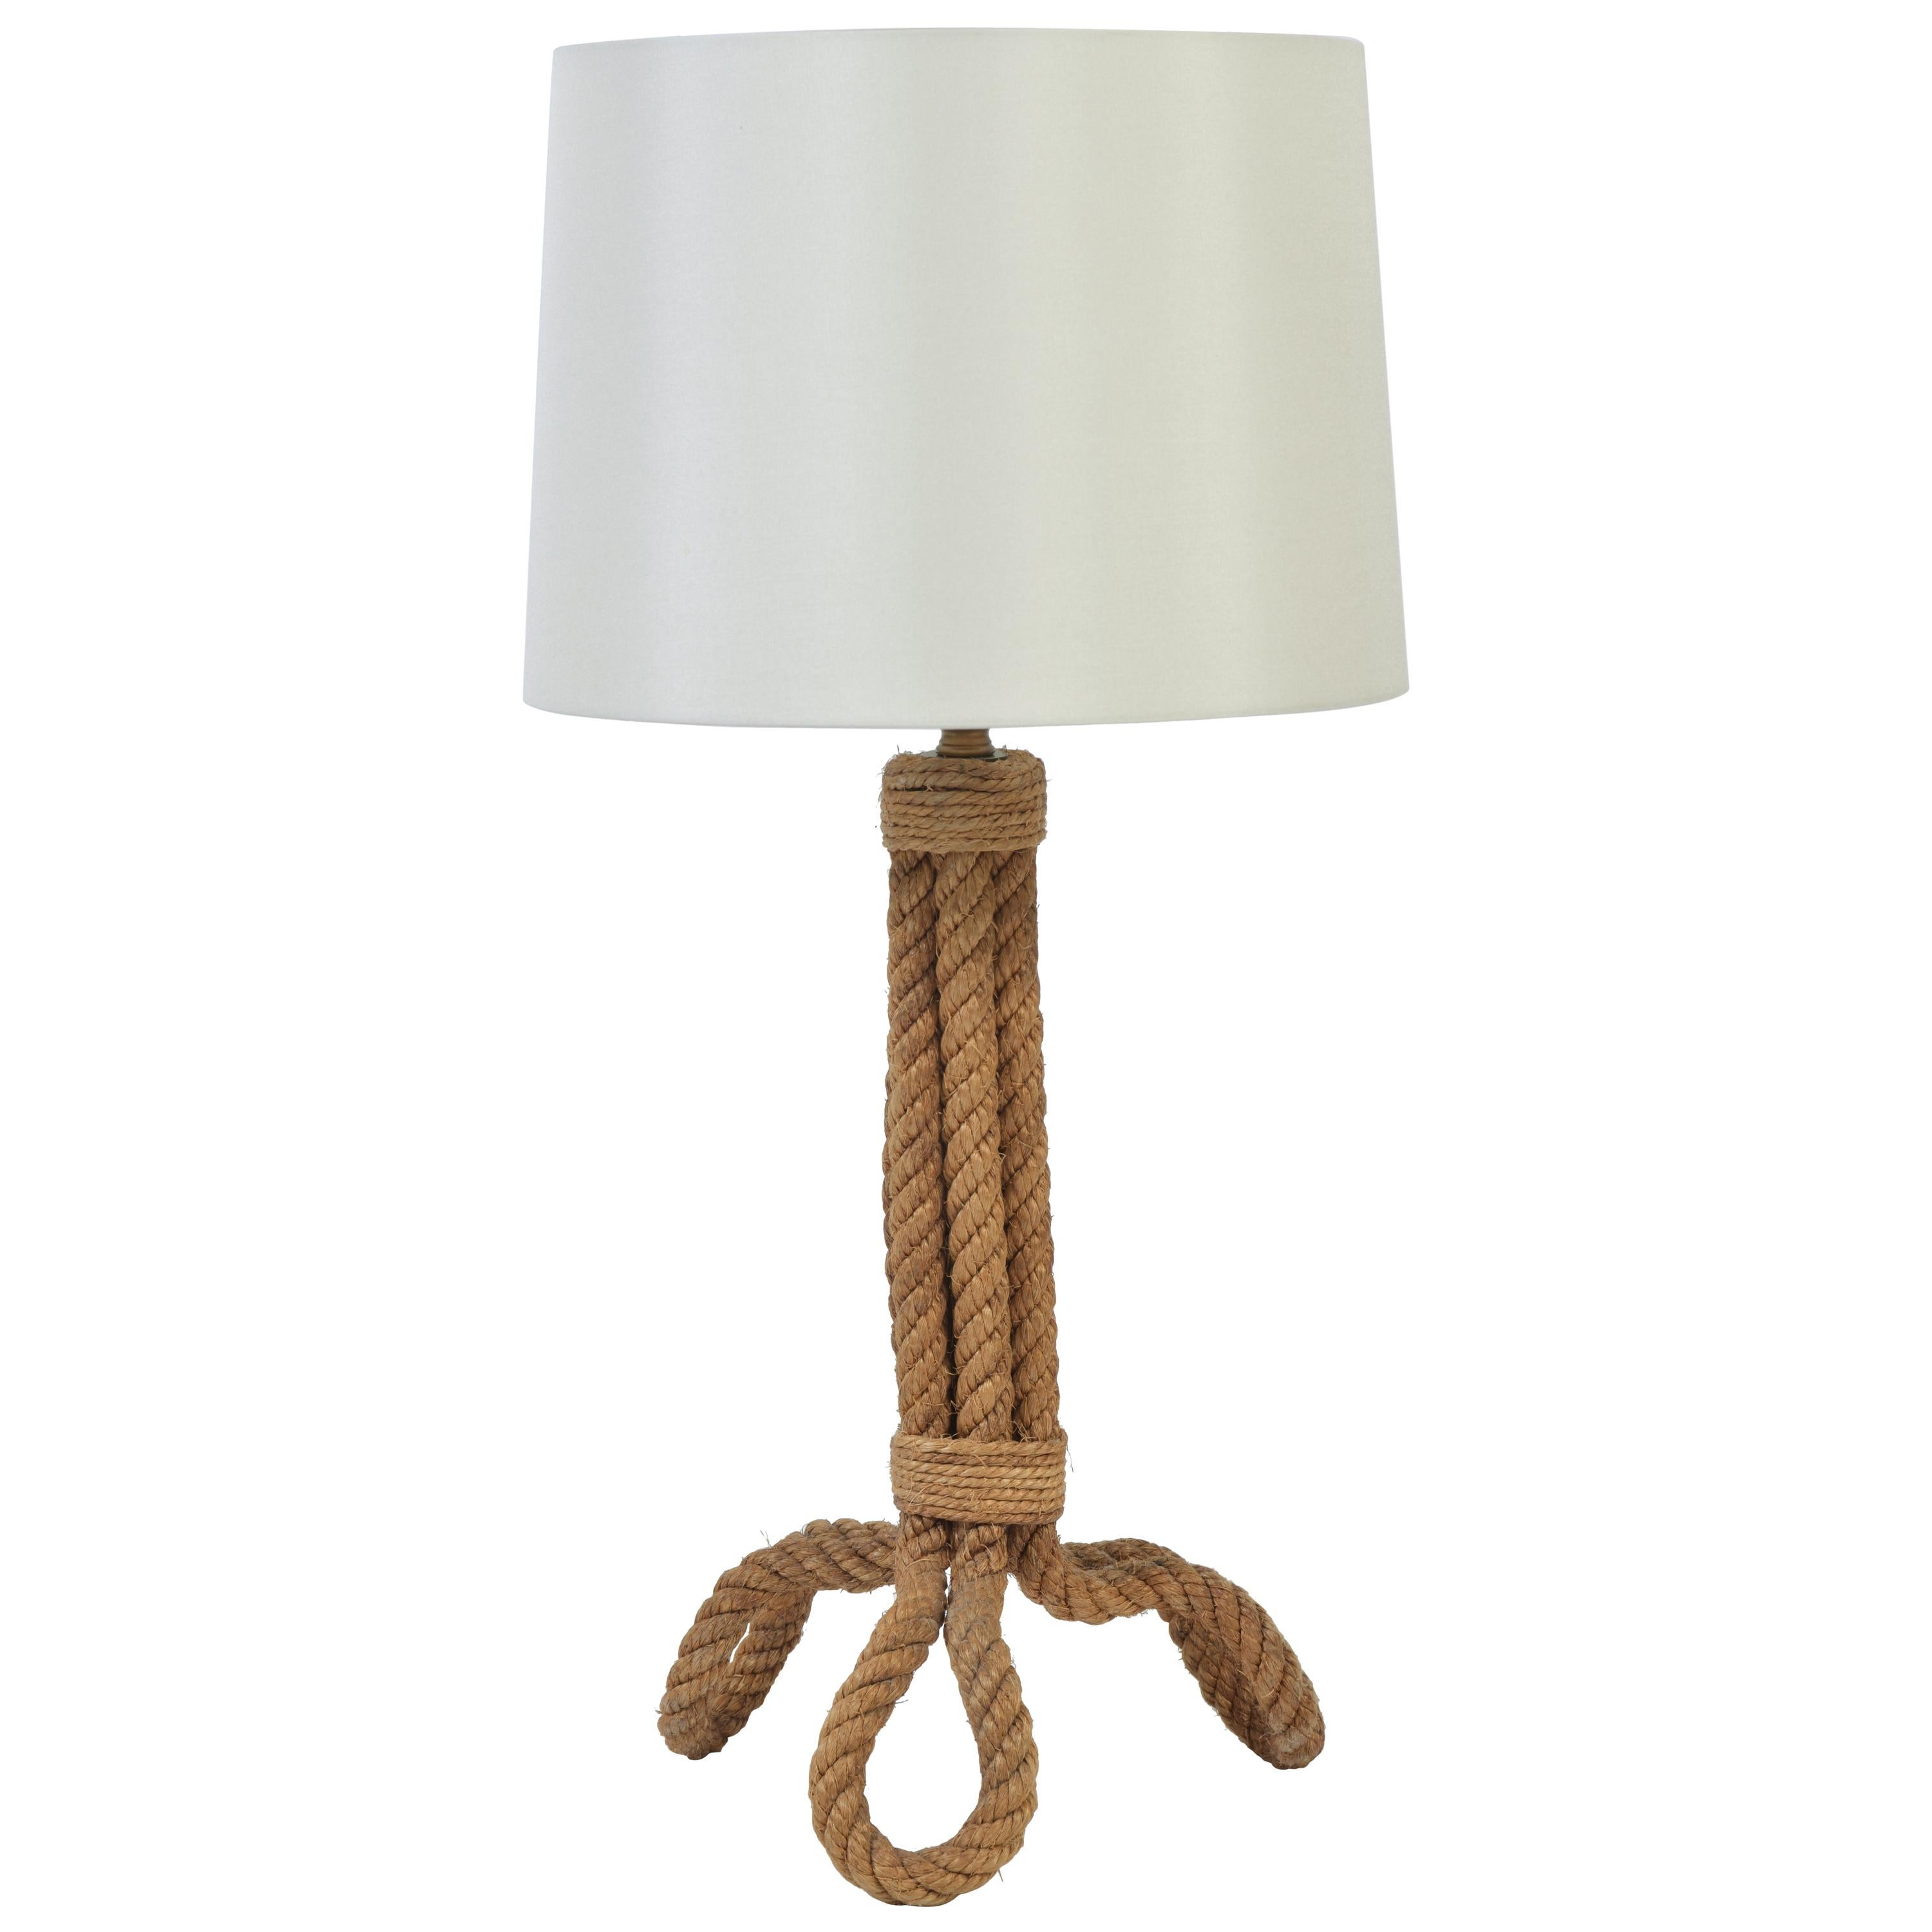 Rope Lamp by Audoux & Minet